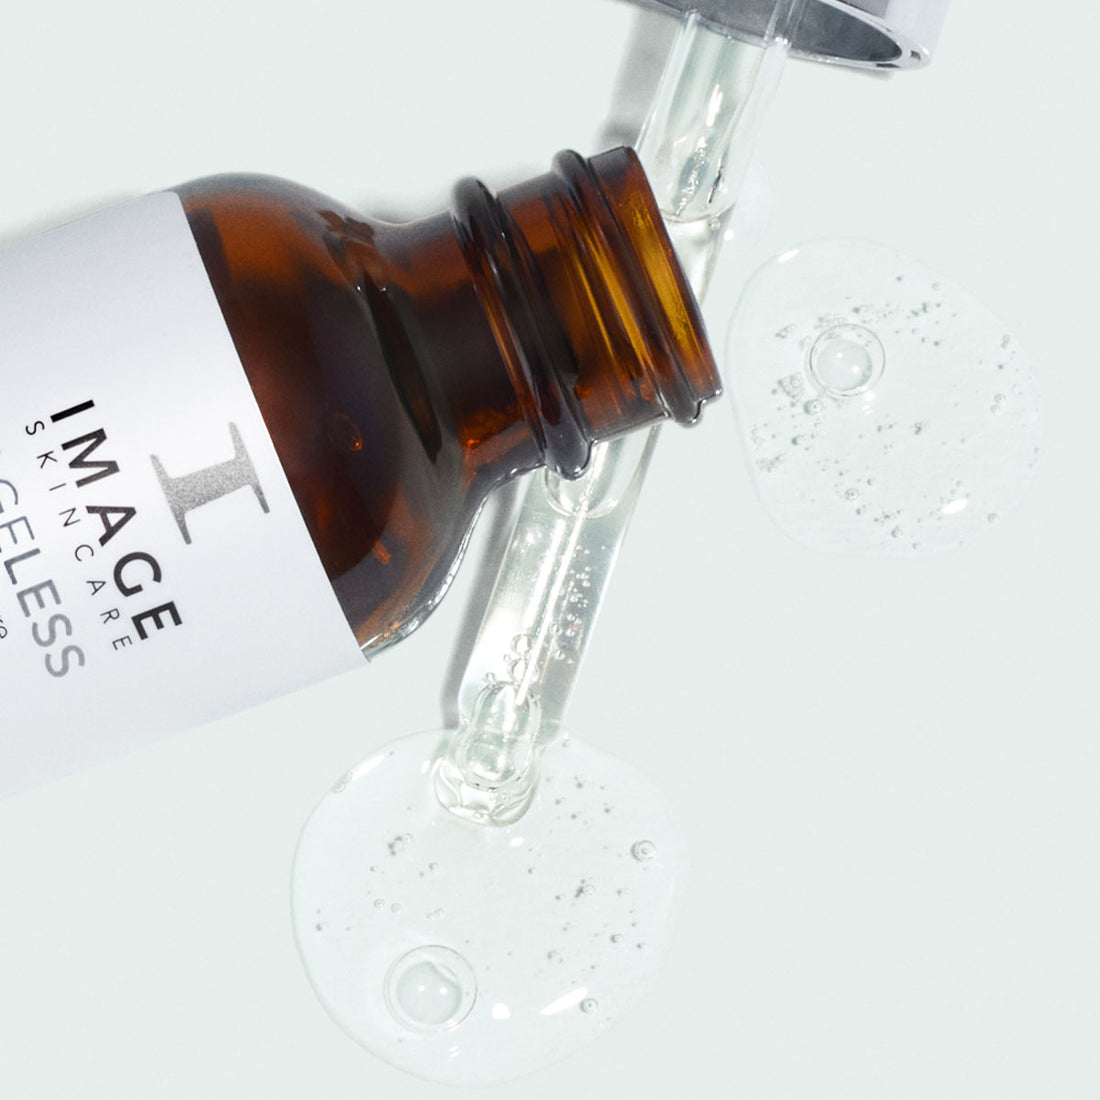 AGELESS - Total Pure Hyaluronic Filler